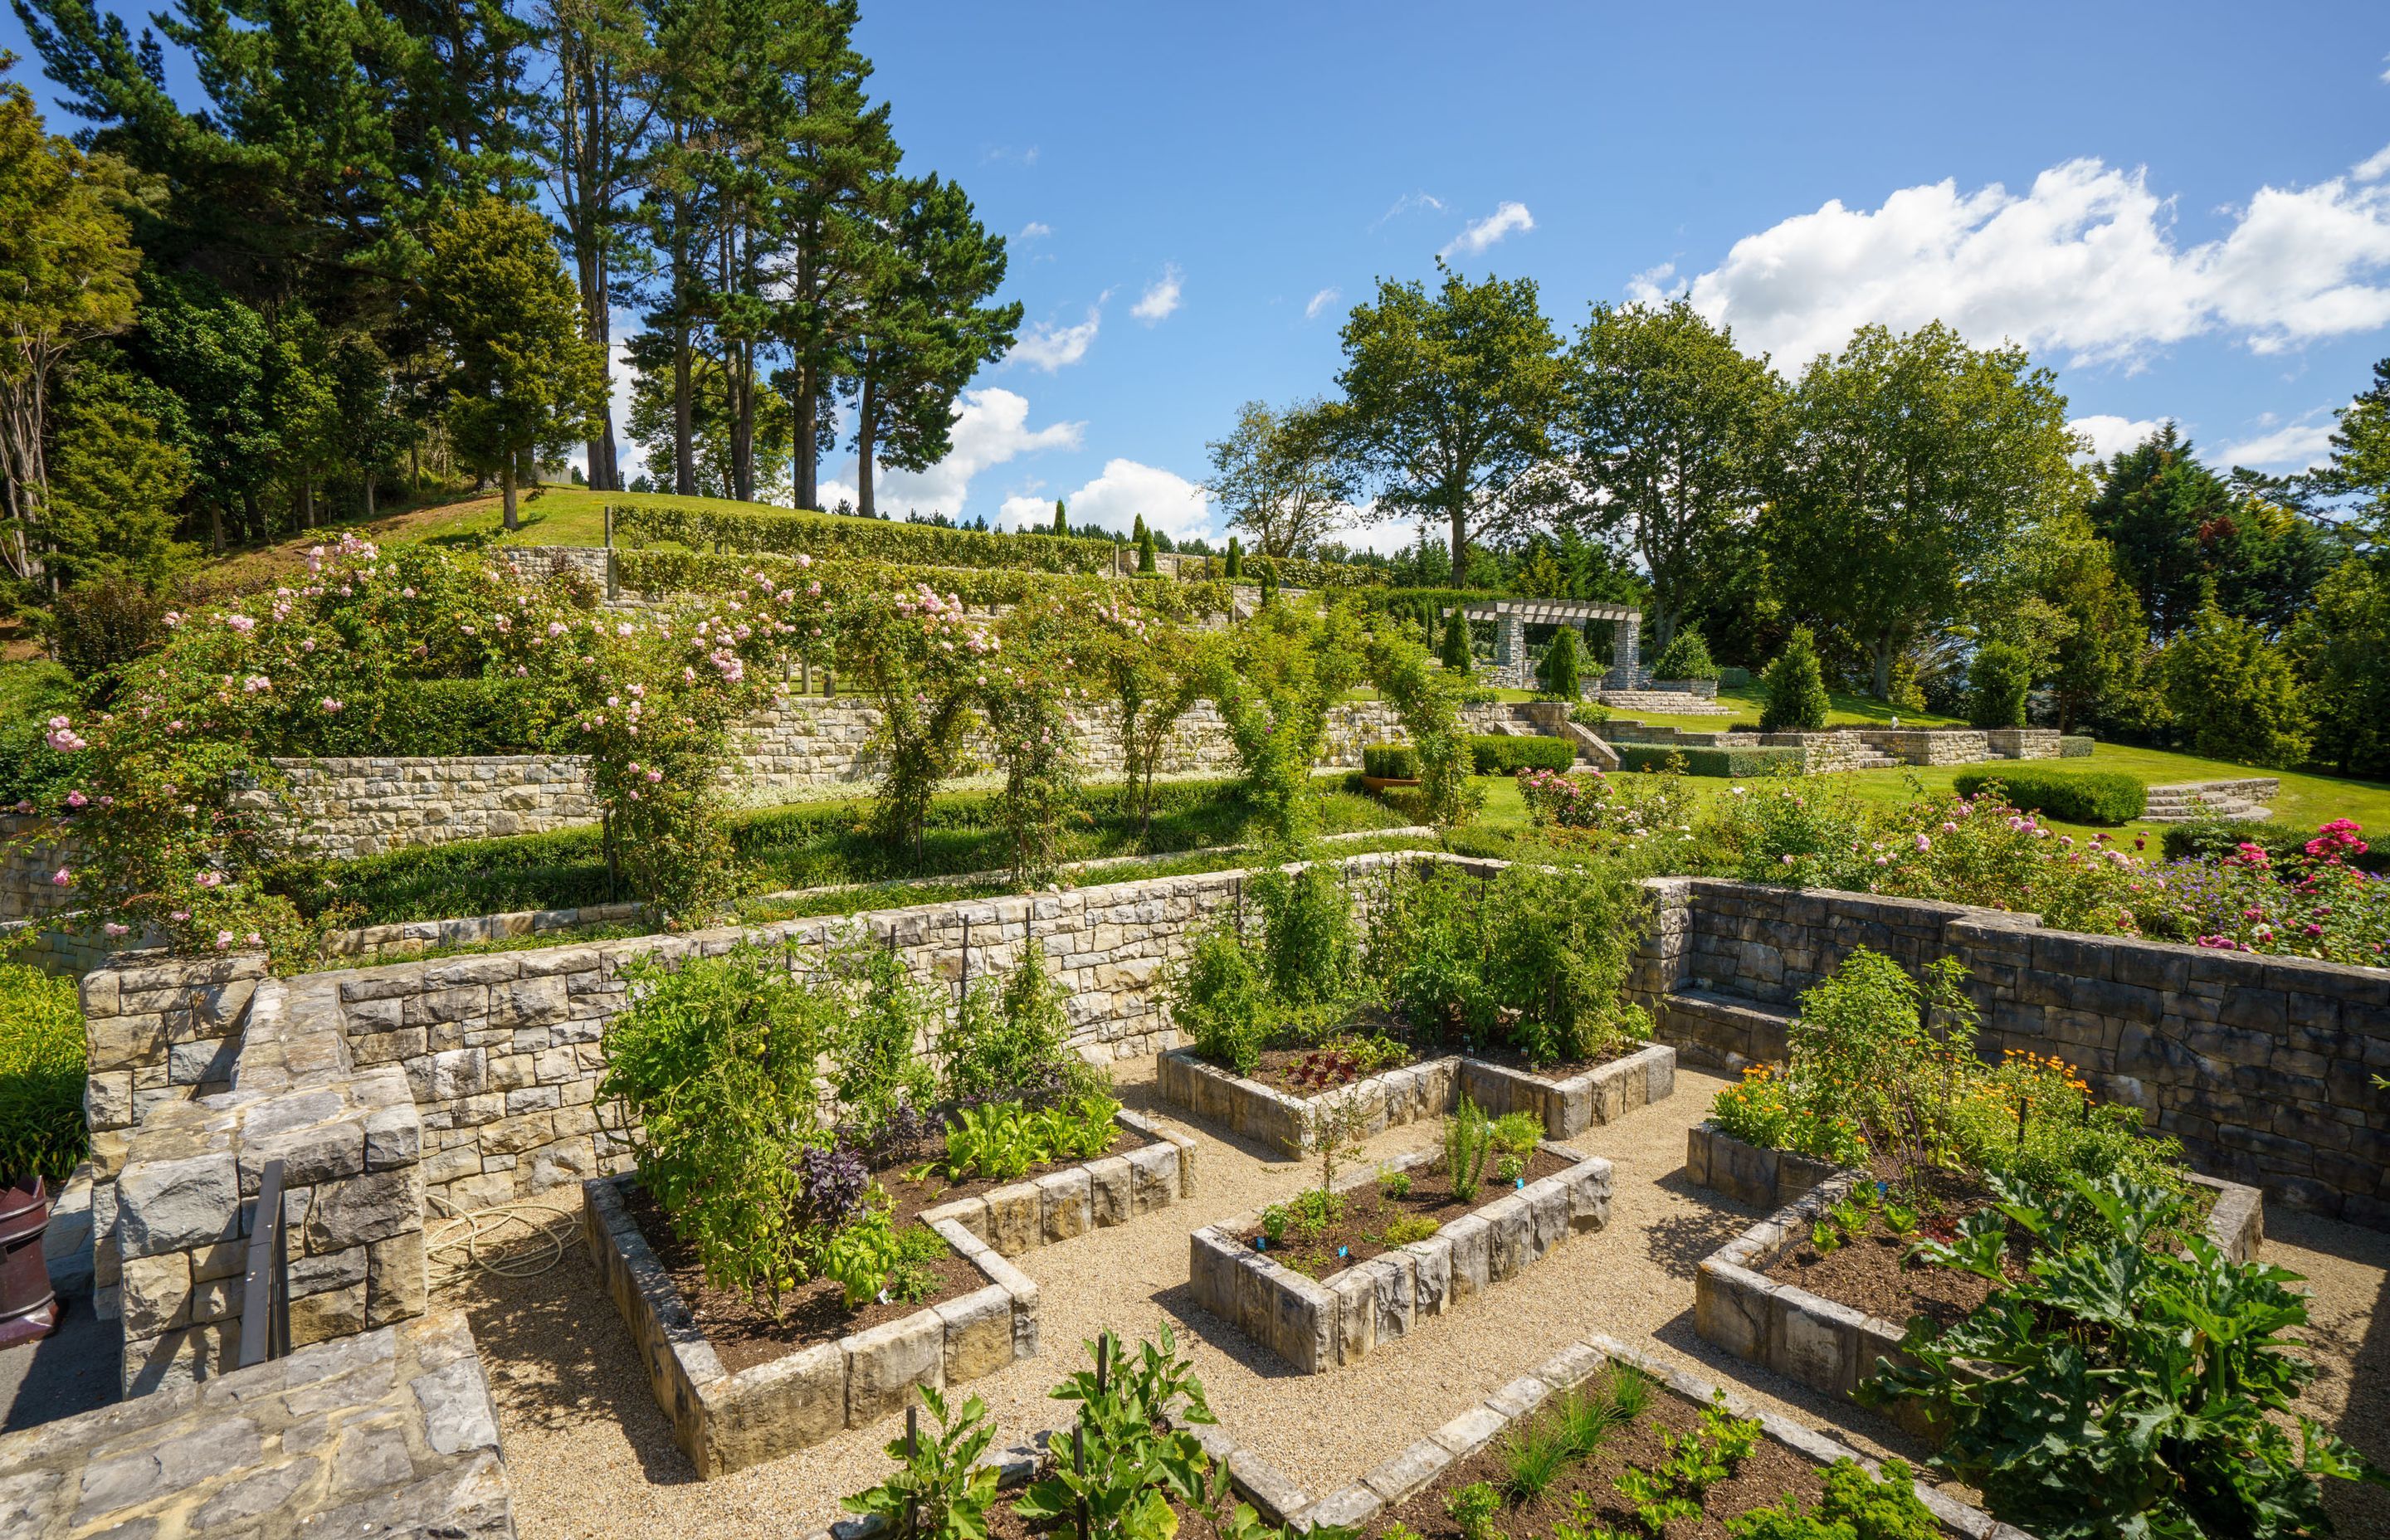 The culmination of six years' work; terraced grape vines, expansive lawn areas and a potager garden, all featuring stunning stone work by the Auckland Stonemasons team.